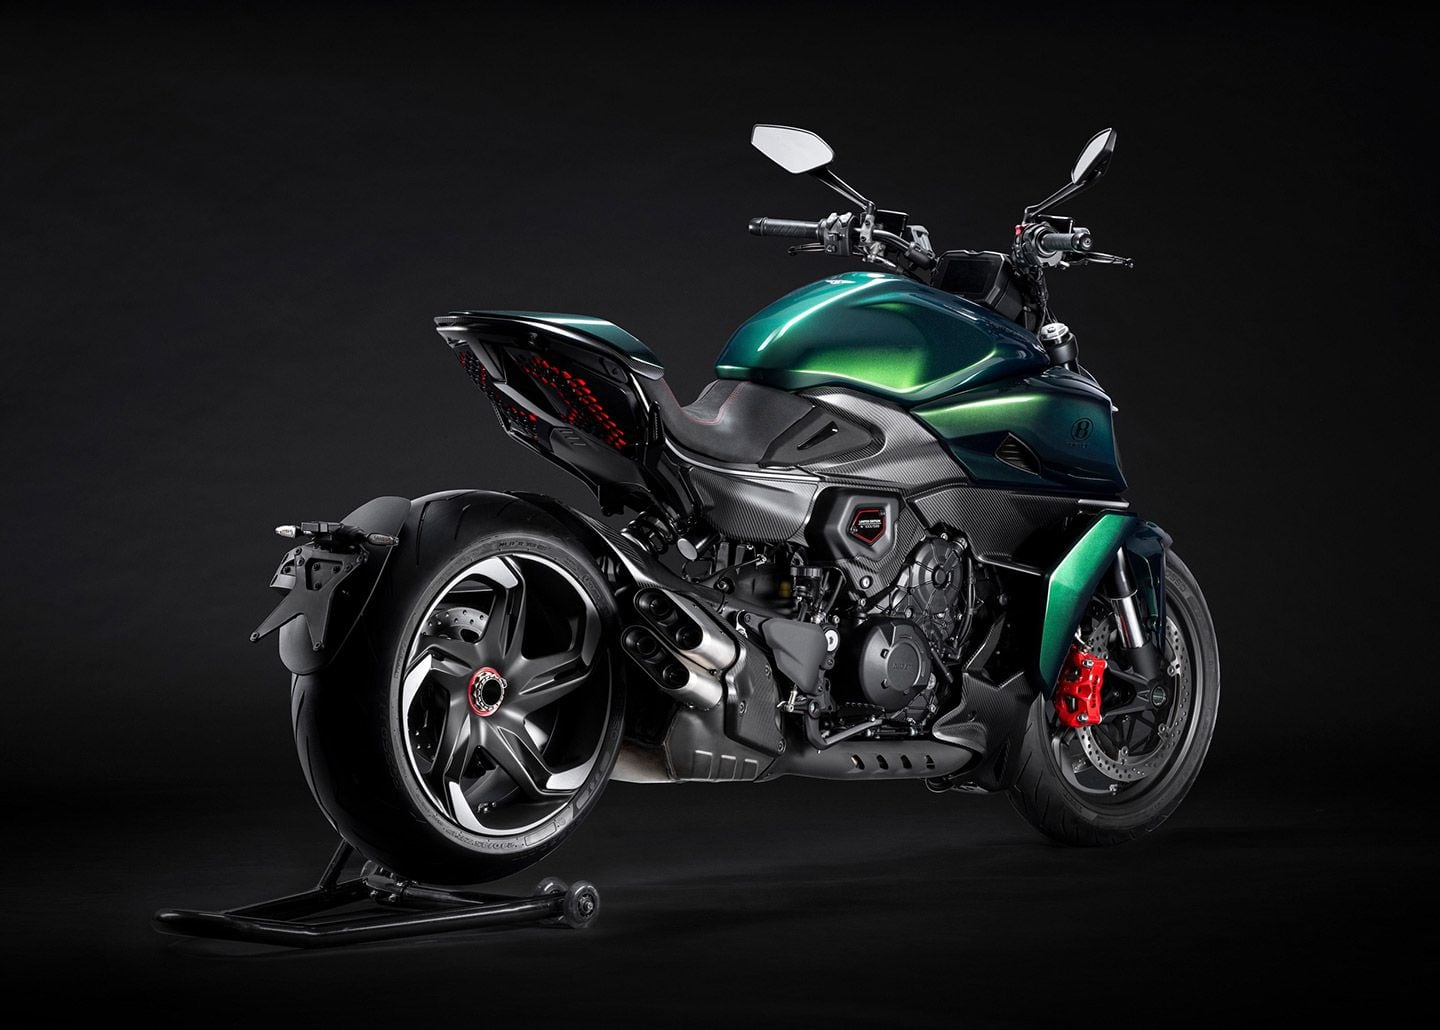 Like the car, the bike rocks a rich green color, but uses the same mechanical elements of the base Diavel V4.